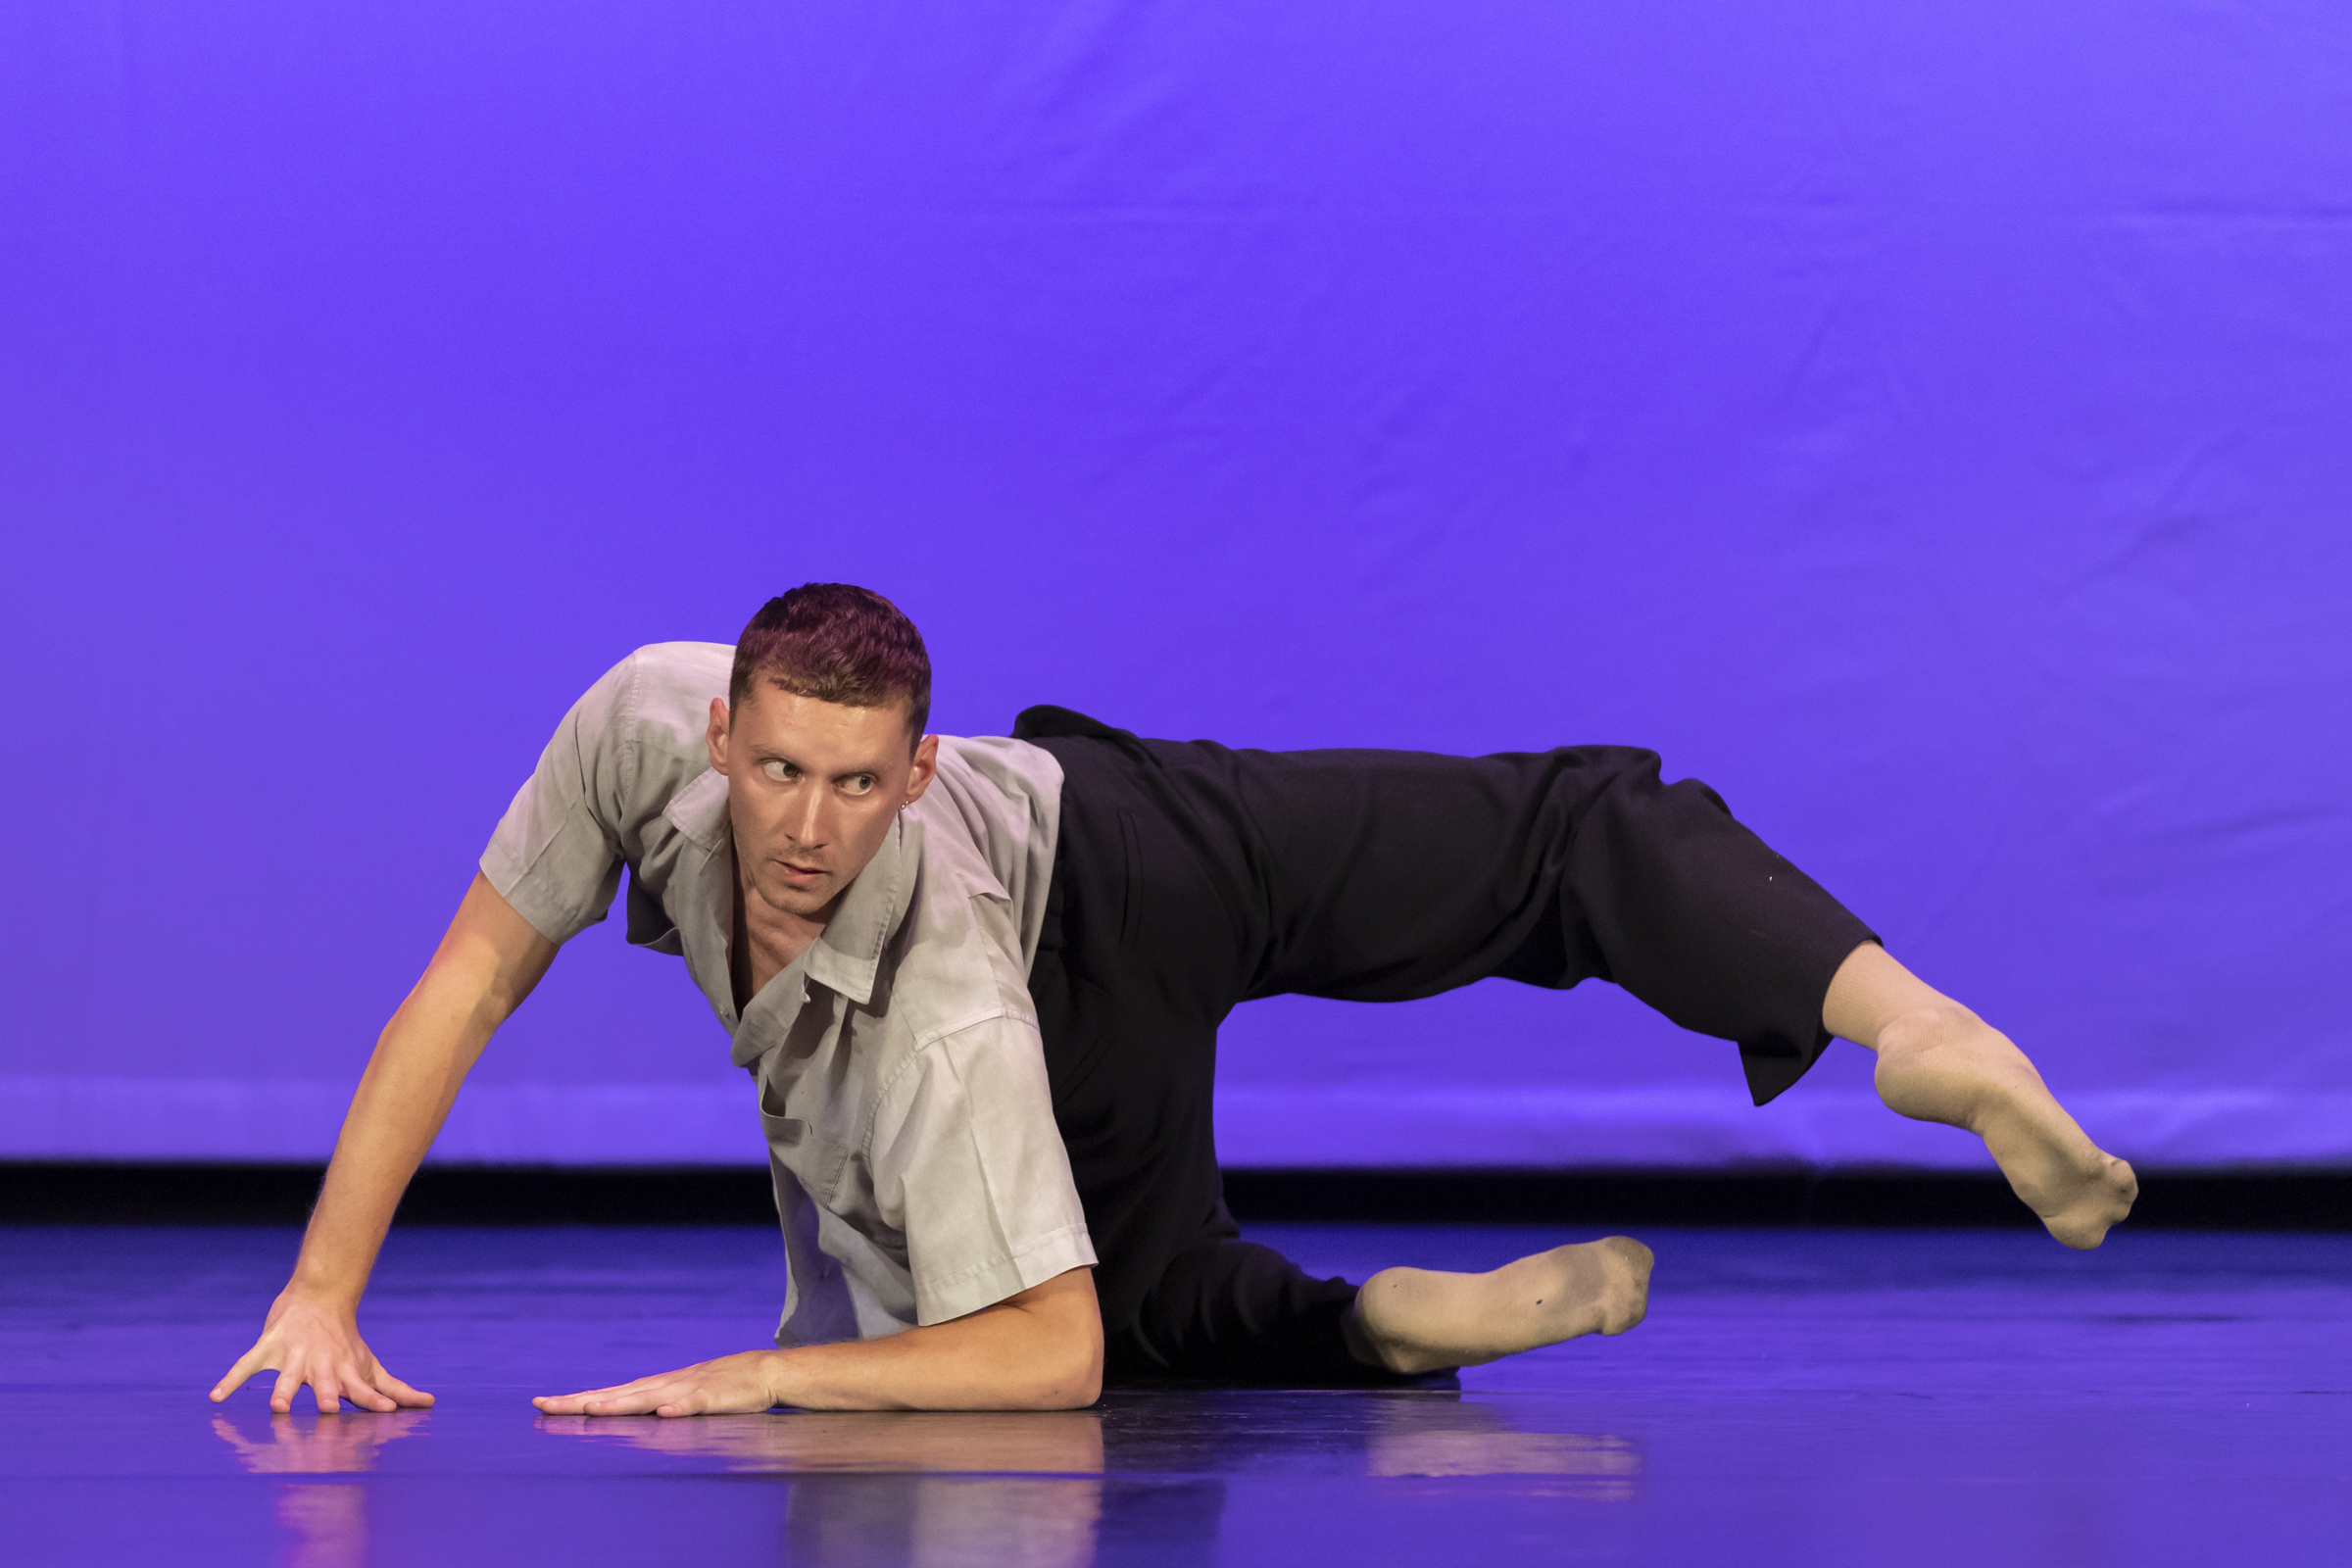 During a solo onstage, Andrew McShea contorts his body to look toward the audience while his hips and legs face backward. He holds himself up on the floor with his arms and lifts his top leg in a bent shape.